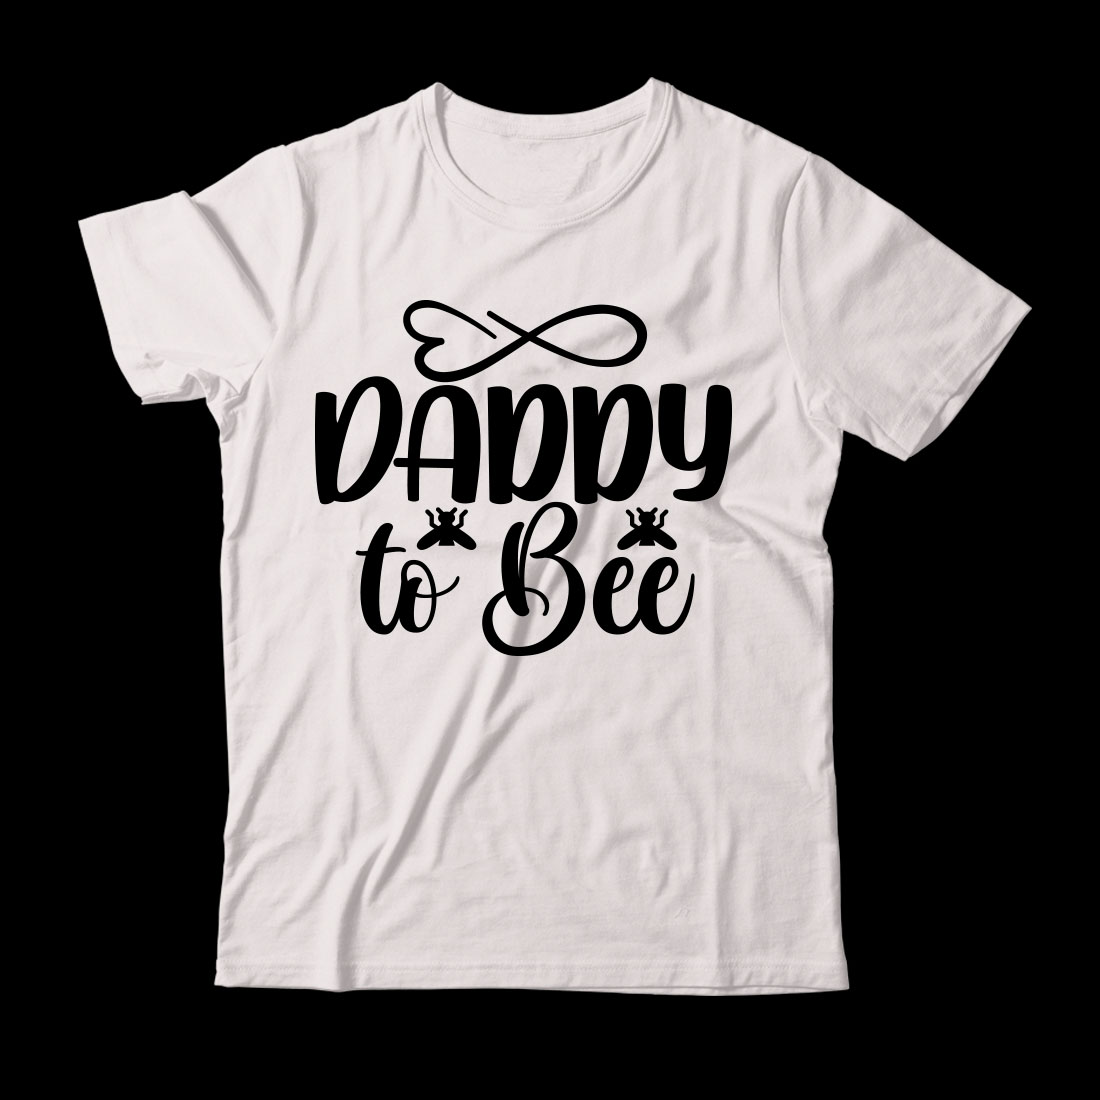 White t - shirt that says happy to bee.